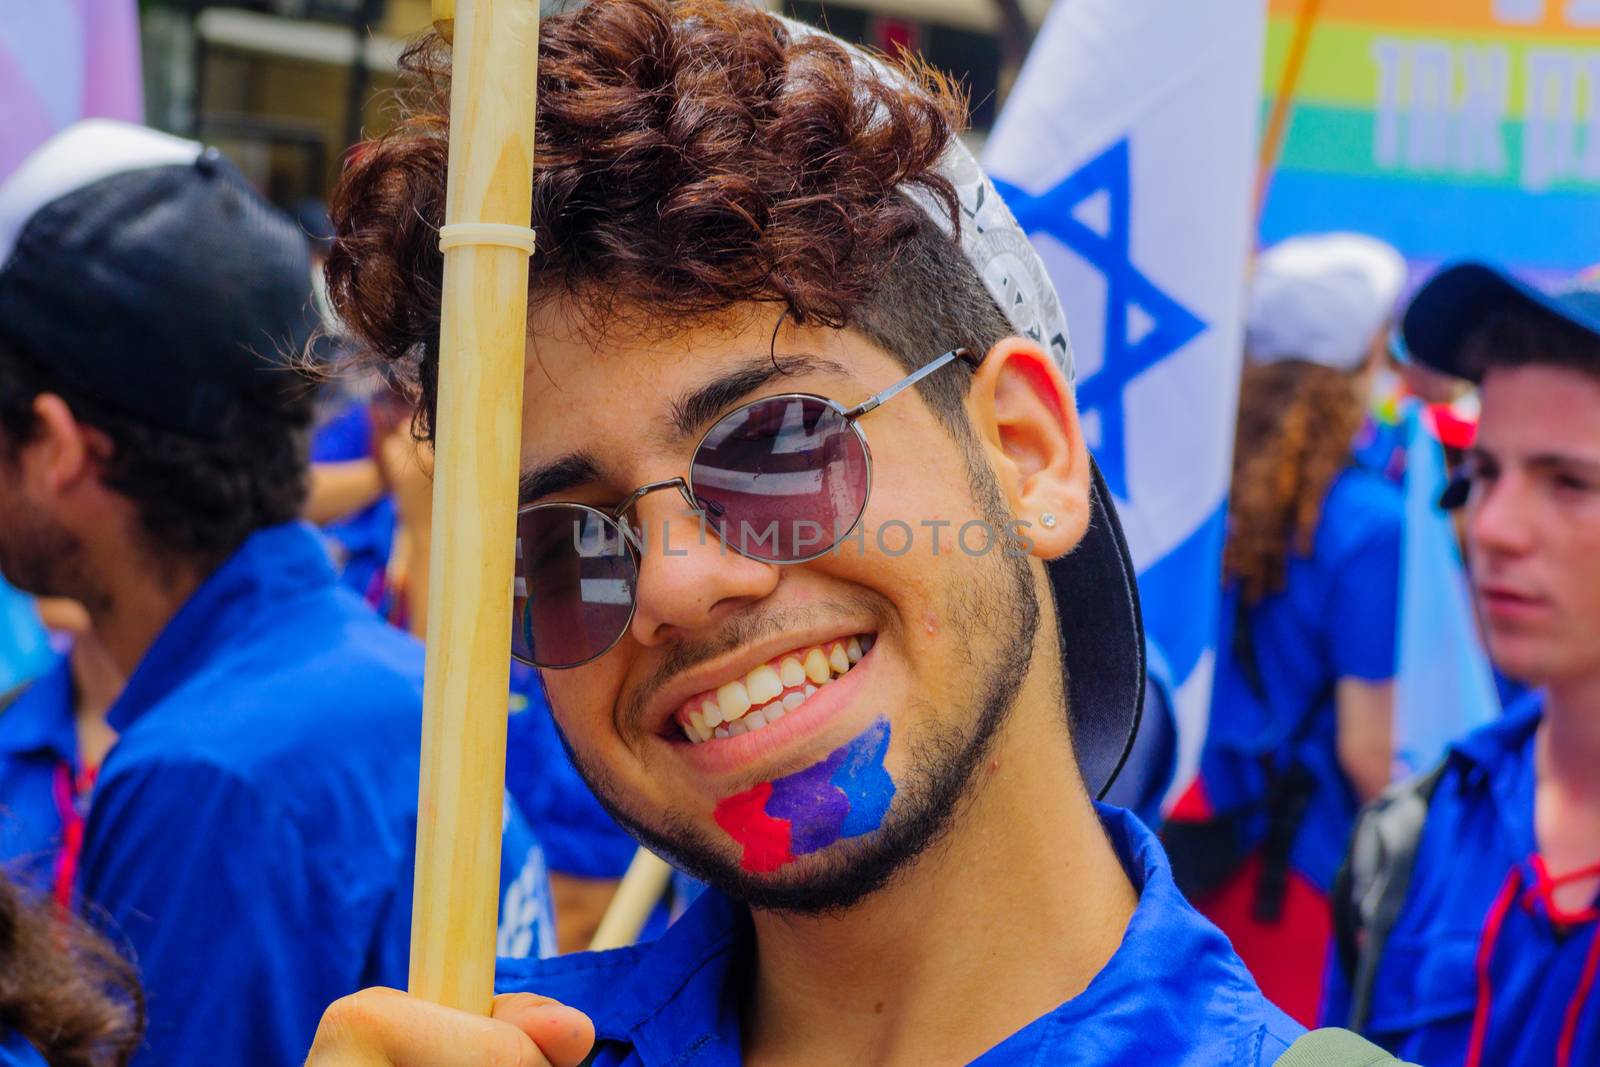 HAIFA, Israel - June 30, 2017: Portrait of a participant in the annual pride parade of the LGBT community, in the streets of Haifa, Israel